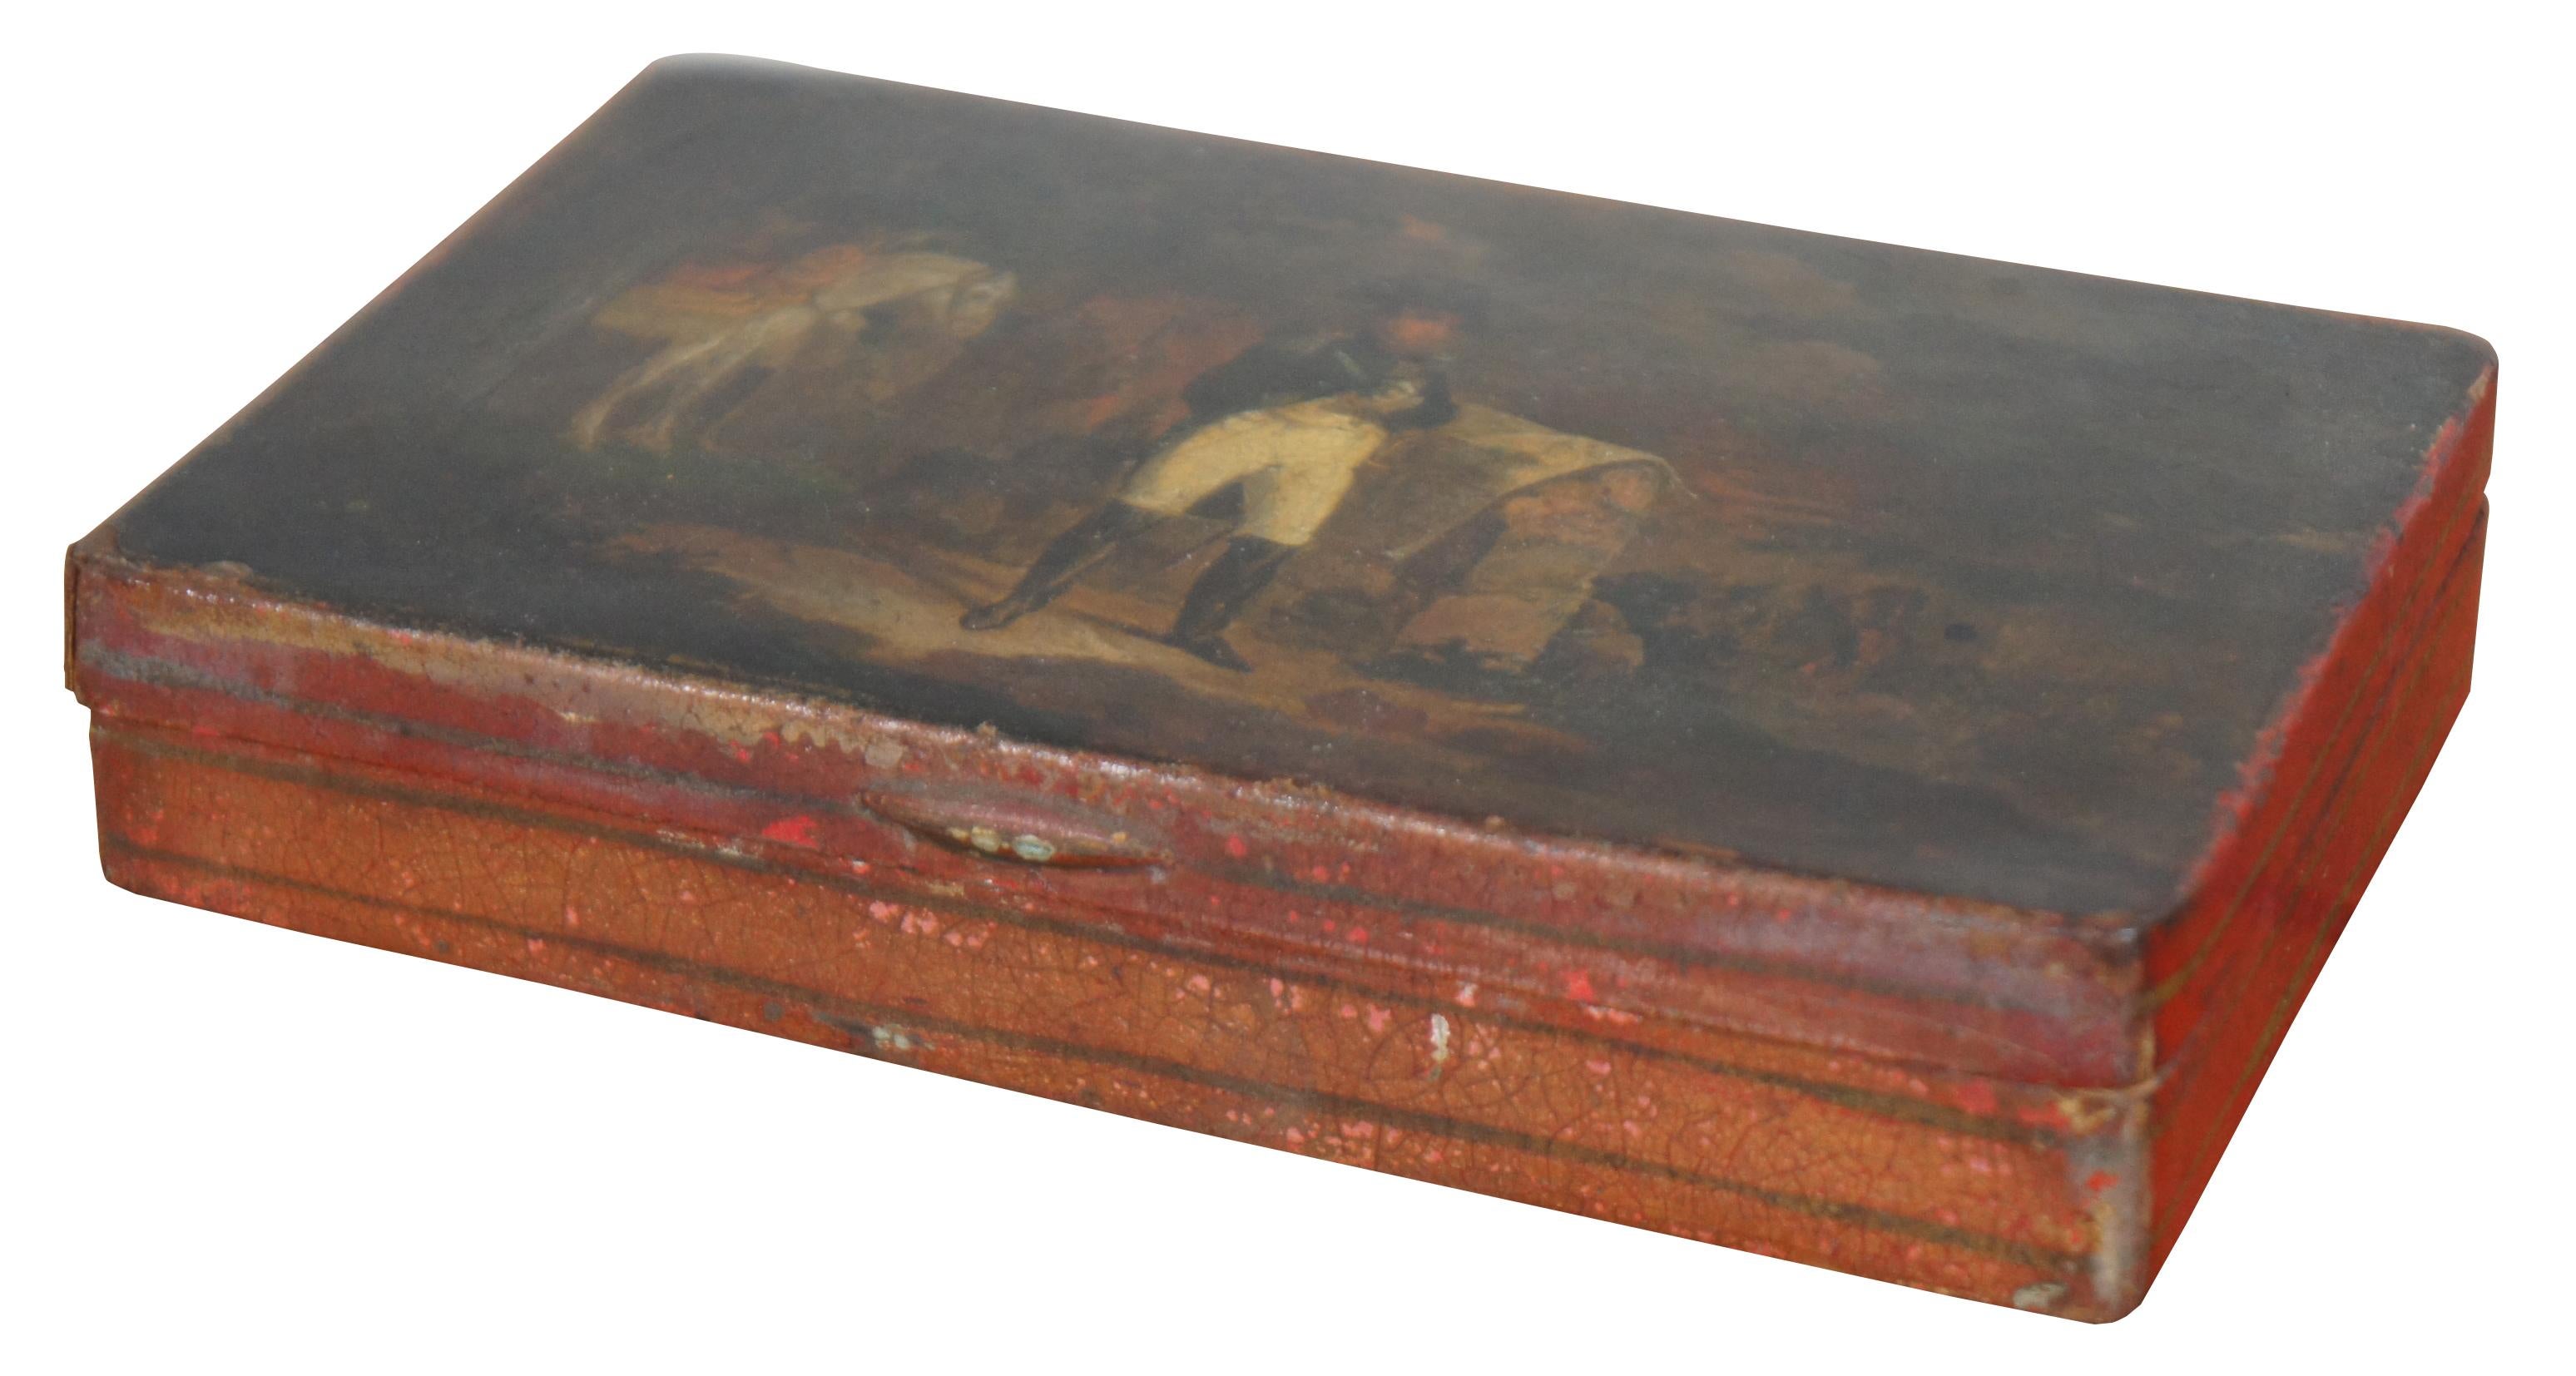 Rare antique metal tin tobacco cigar or cigarette box painted in red with an intricate scene on the lid of Napoleon Bonaparte surveying a map, with a white horse and soldiers at the ready.
